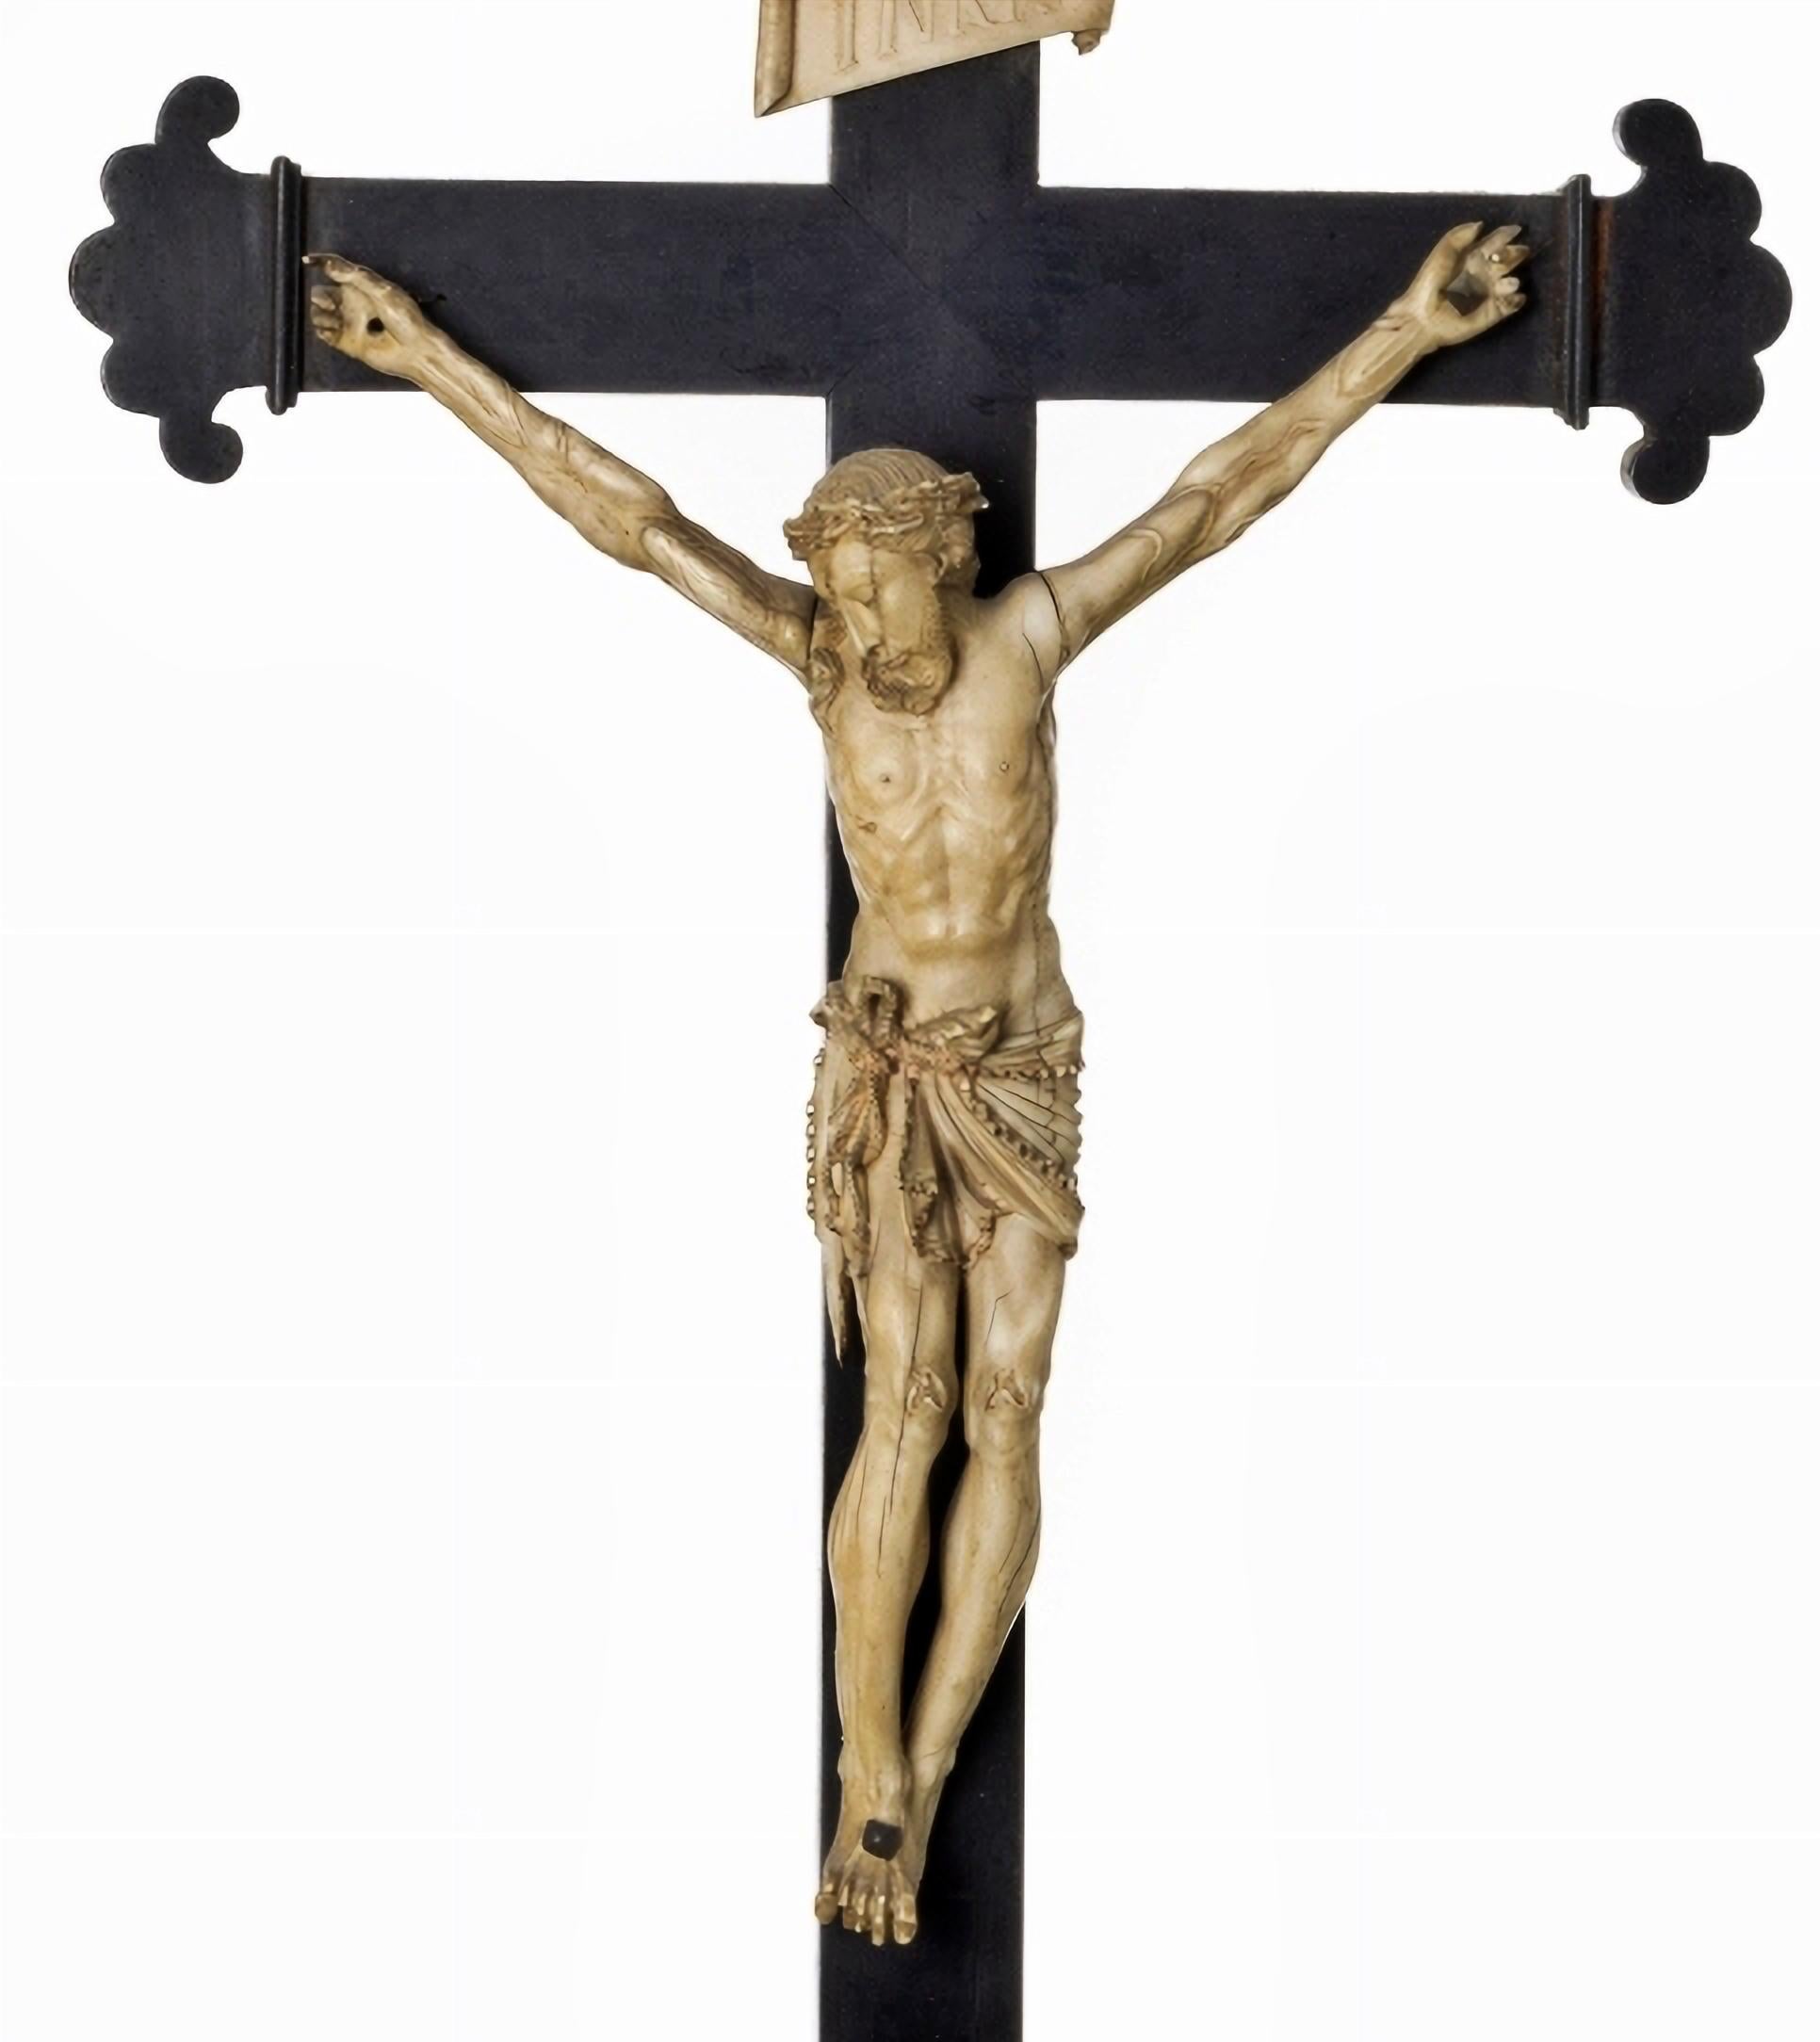 JESUS CHRIST CRUCIFIED
Indo-Portuguese sculpture, 17th Century on Ivor....
Wooden cross with ivory plaque. Defects and faults. Height: (christ) 26 cm.; Height: (total) 63 cm
good conditions